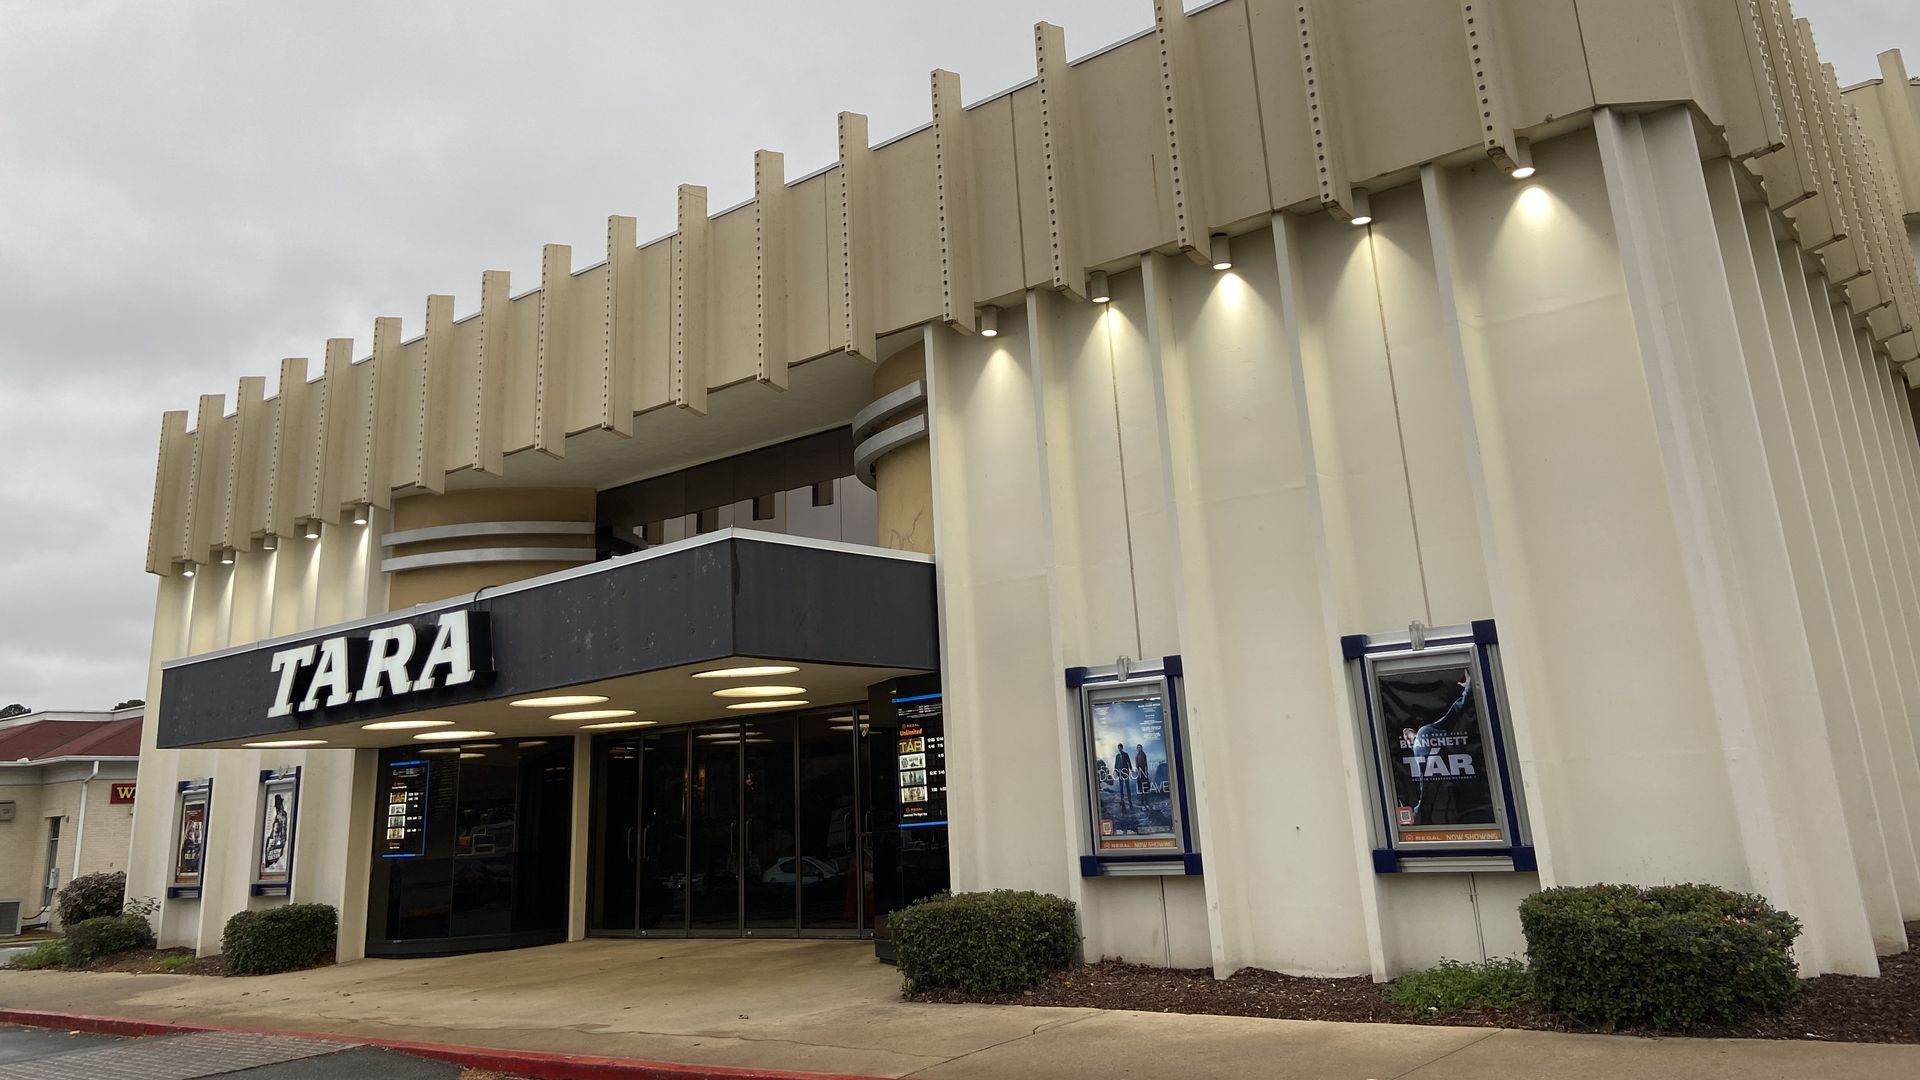 A boxy movie theater with the word “Tara” in big letters on the overhang